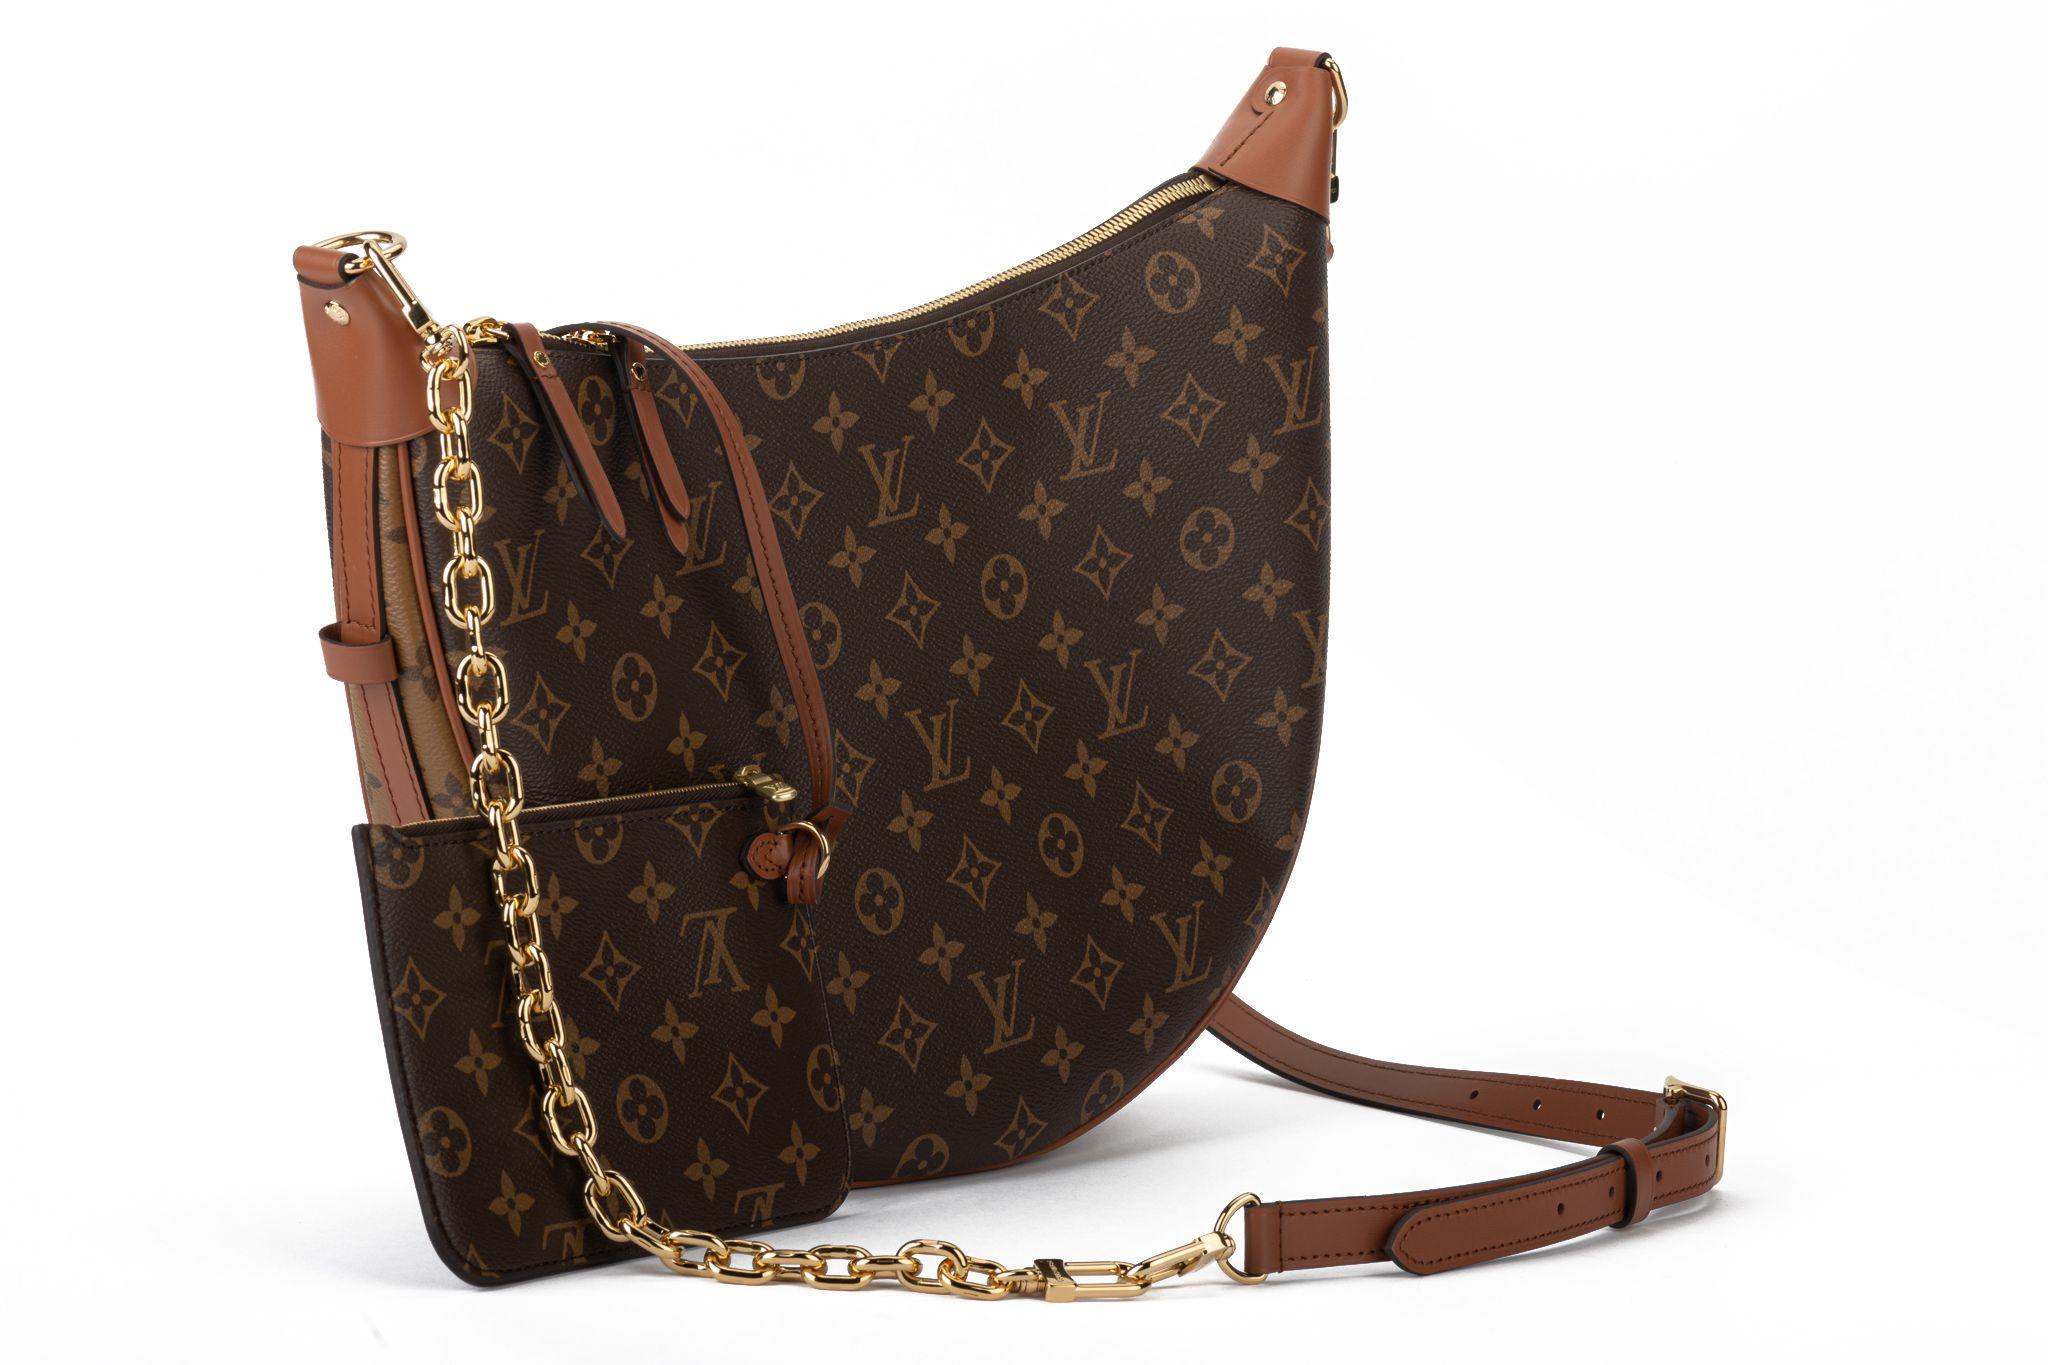 Louis Vuitton sold out worldwide new in box hobo 2 way shoulder bag. Dark leather reminiscing 70s Vuitton collections. Interchangeable leather and chain strap. Detachable mini pochette, 7”x5”. Chain Drop 7”. Leather drop 14”. Comes with original